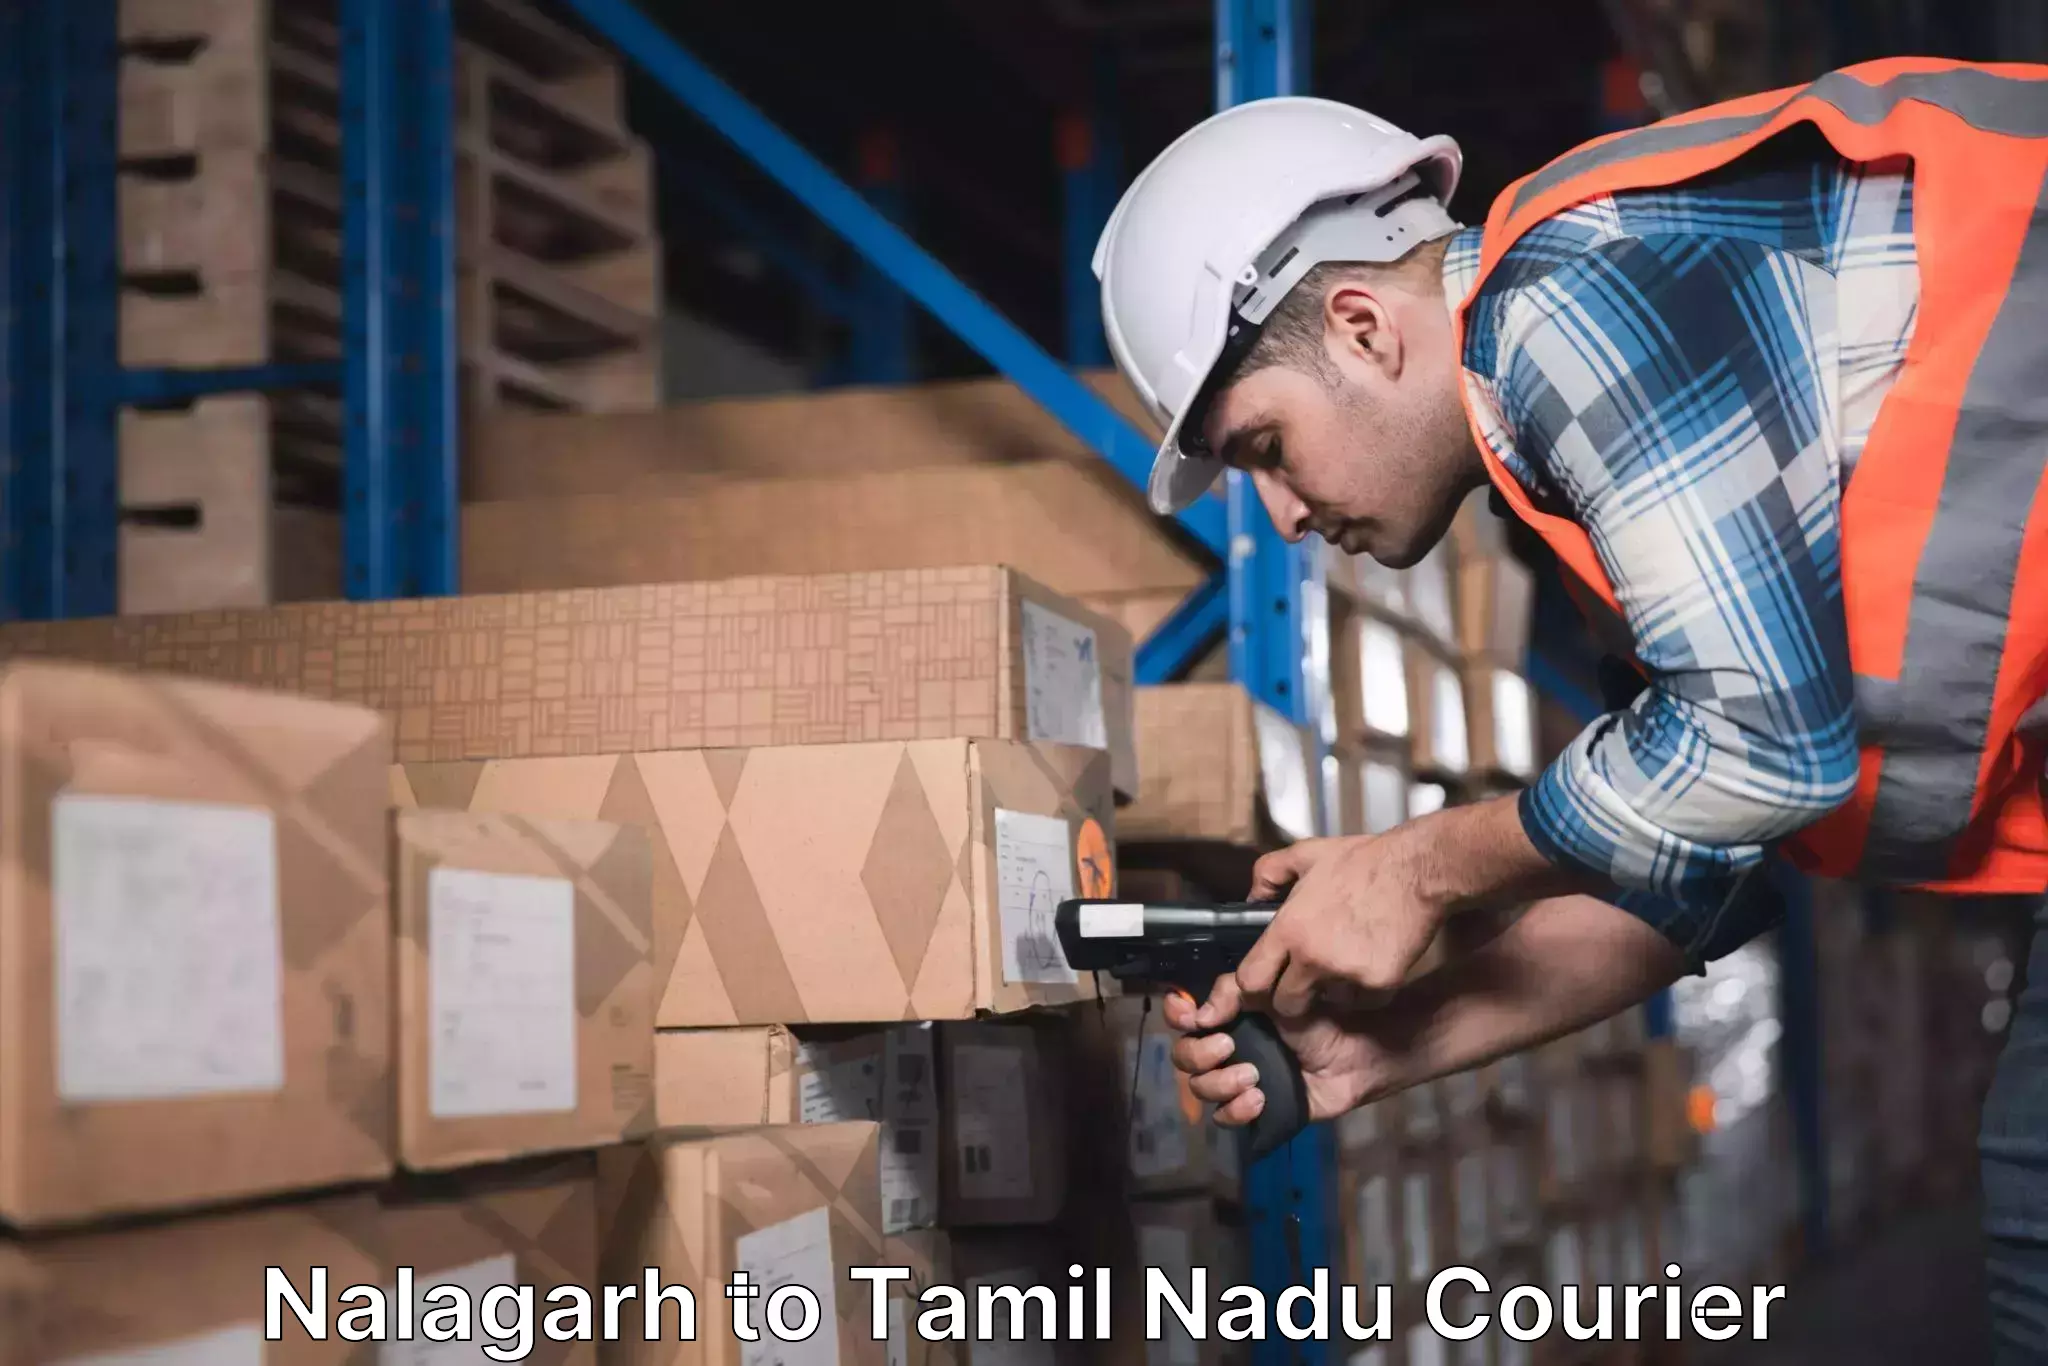 Courier service partnerships Nalagarh to Ennore Port Chennai